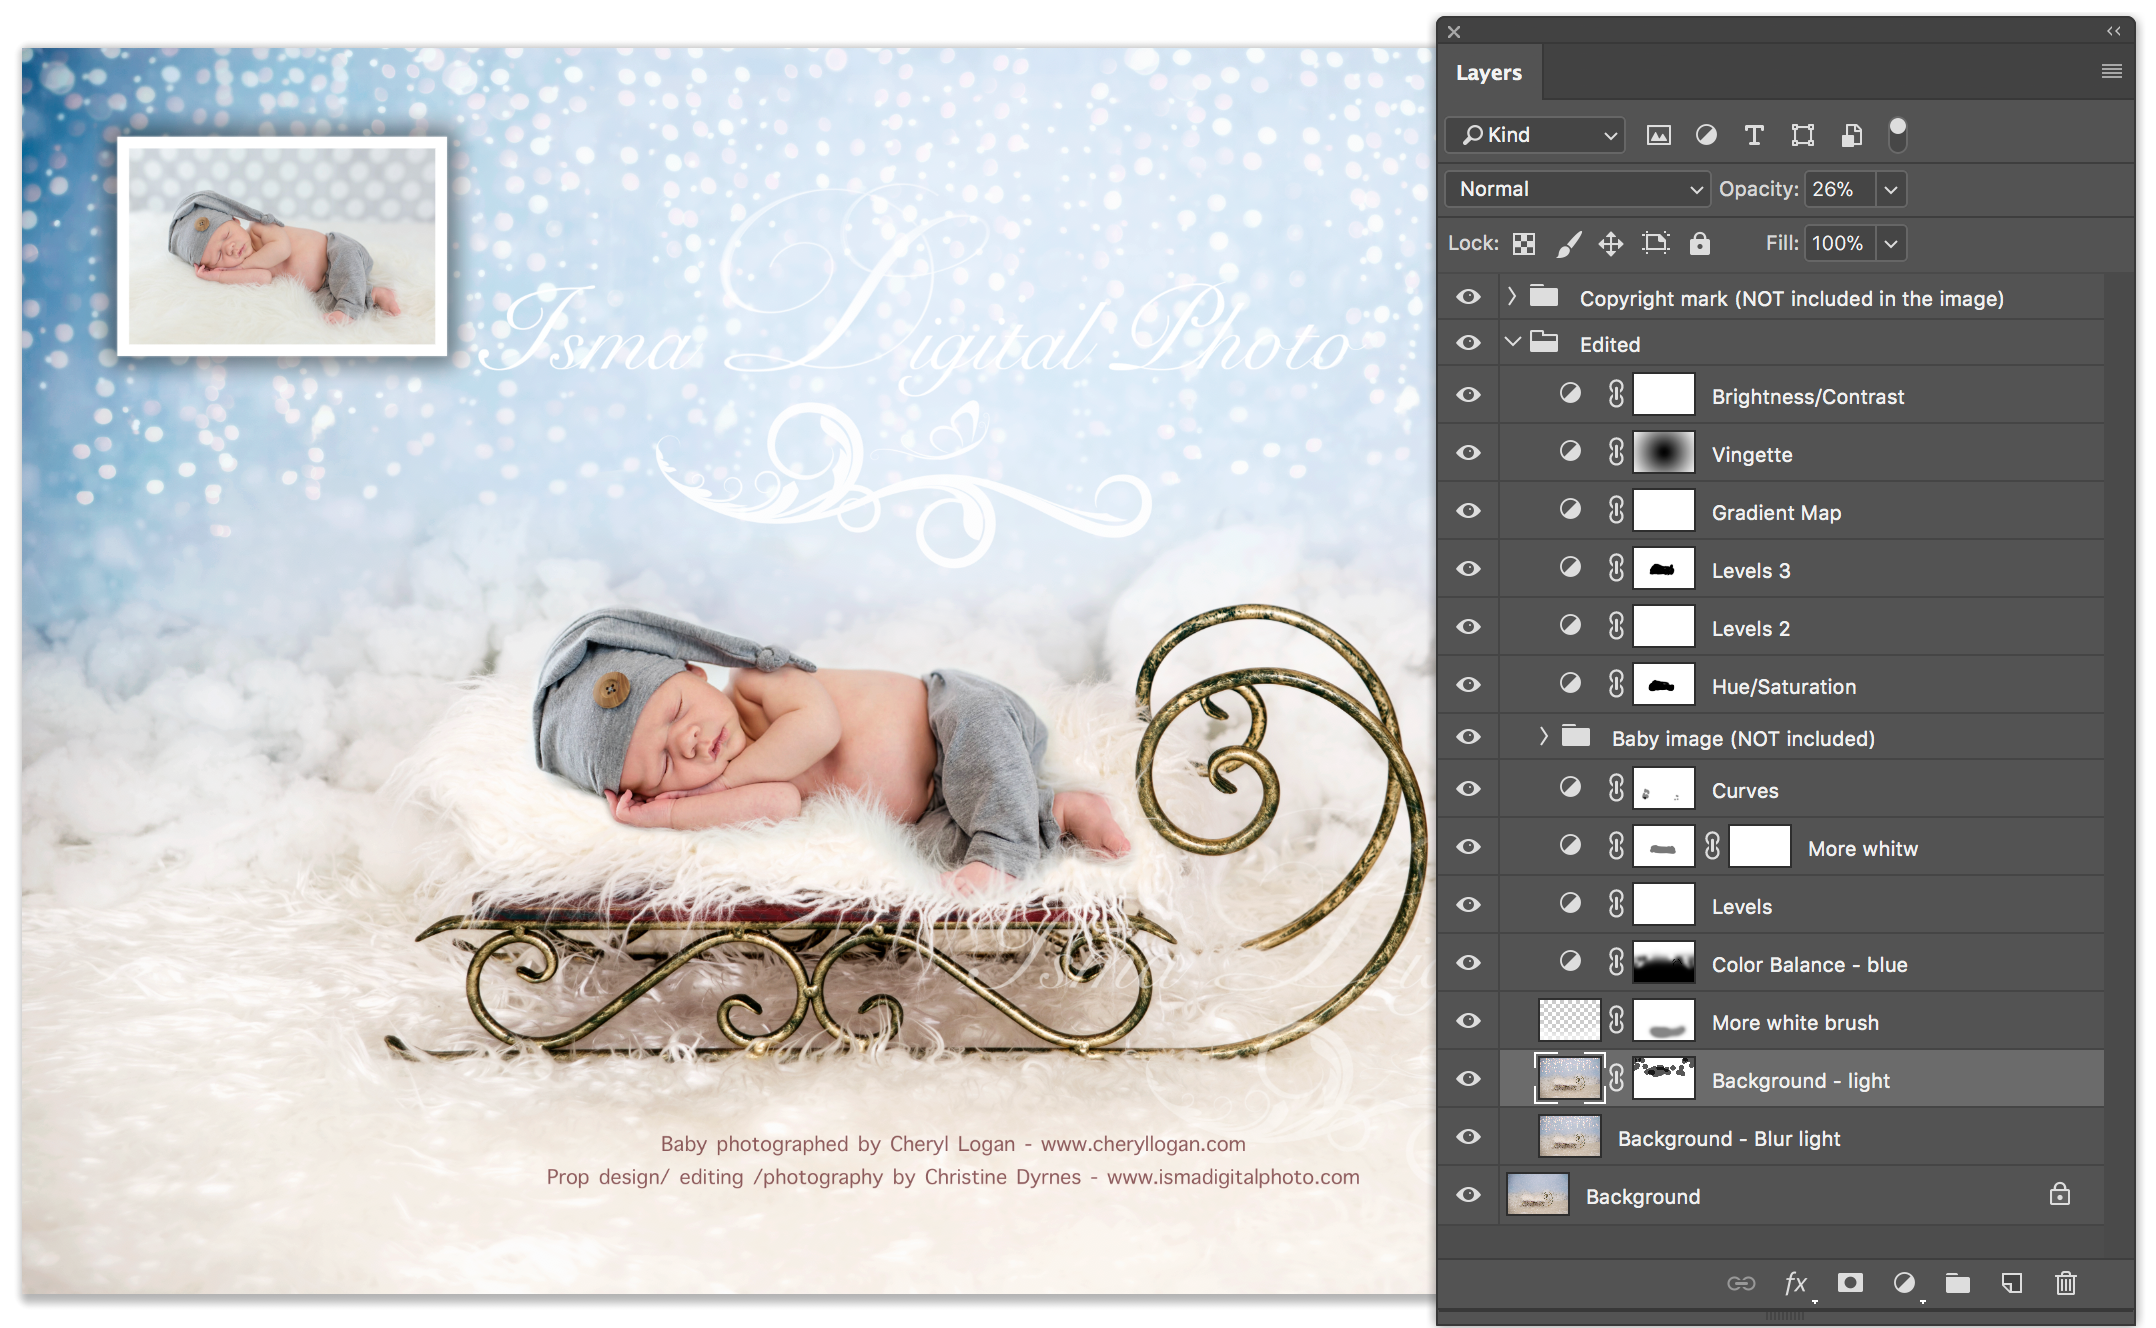 Digital Backdrop /Props for Newborn /baby photography - High resolution digital backdrop /background - two JPG and one PSD file with layers